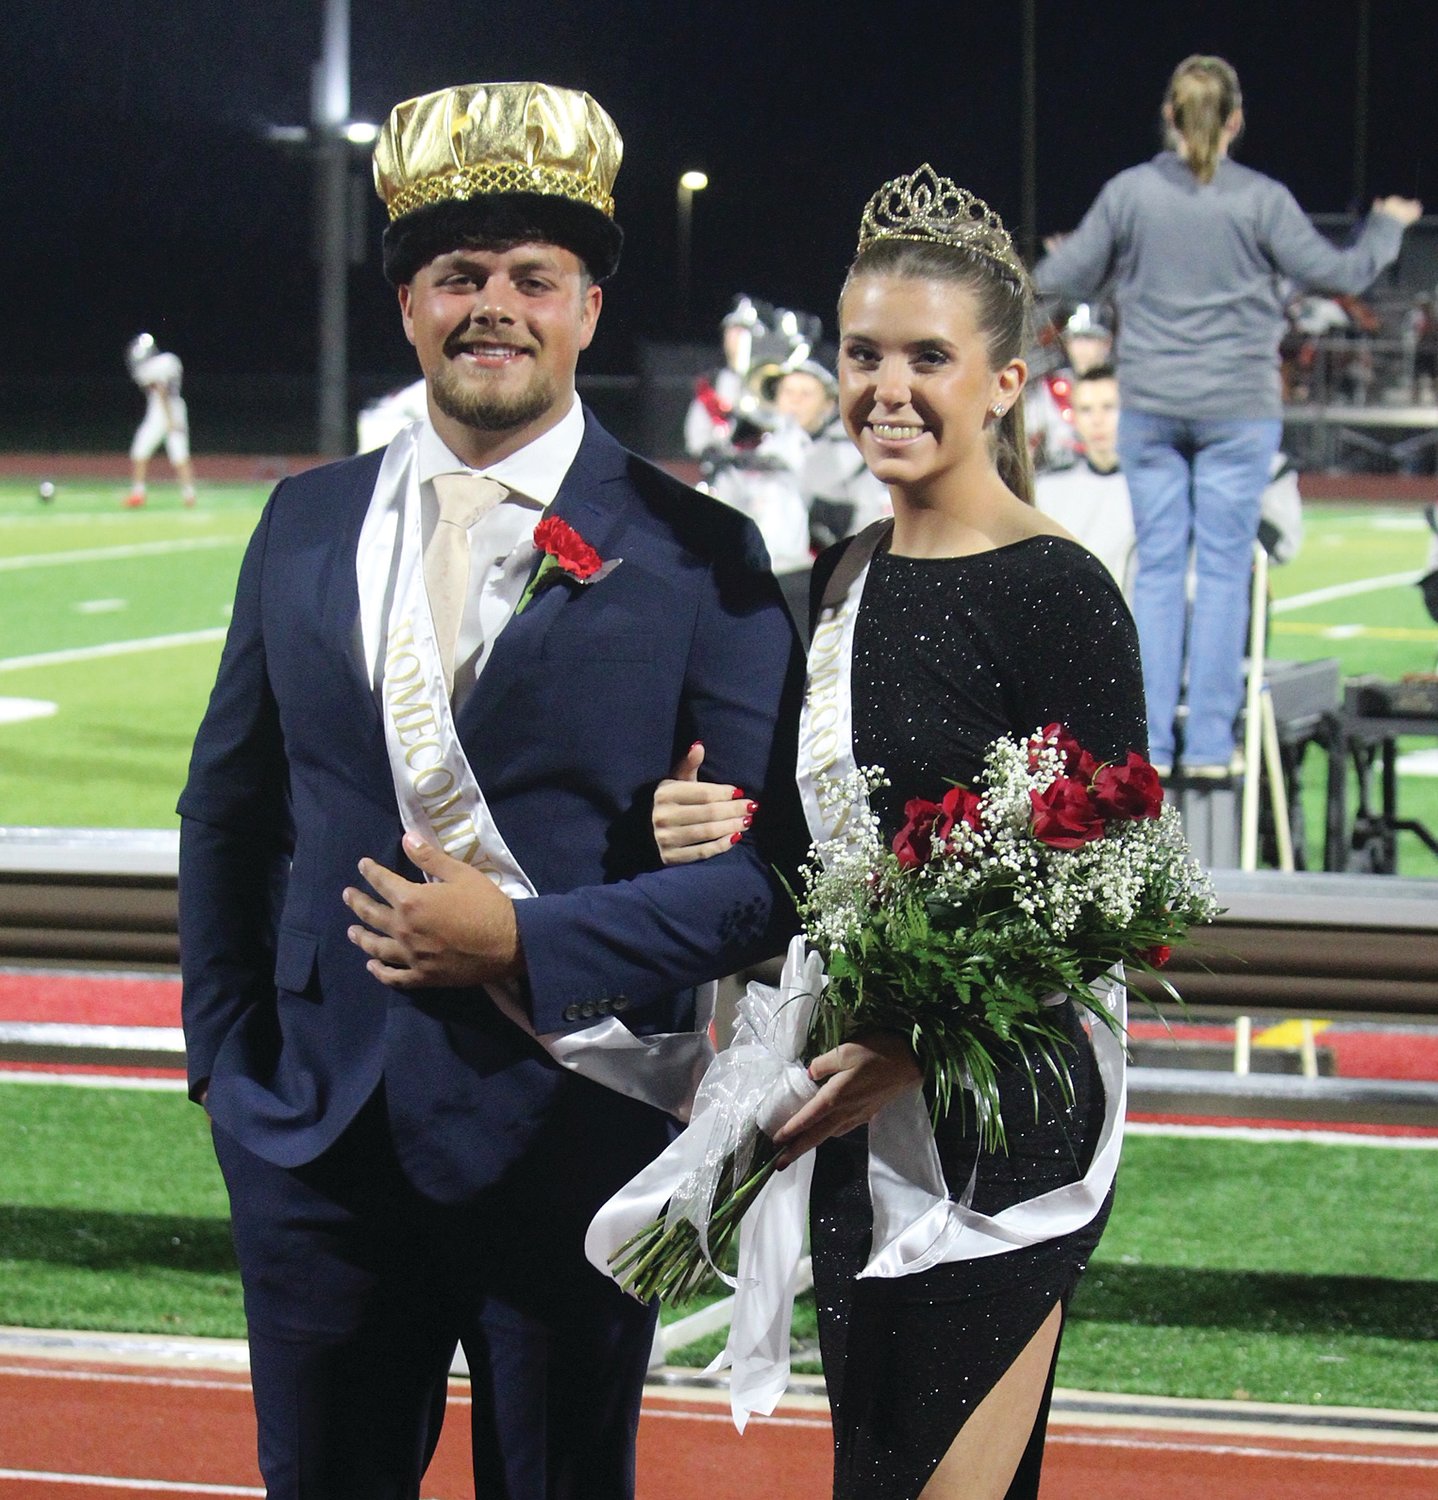 Mason Hall and Chelsea Veatch were crowned the 2022 Homecoming King and Queen at Southmont High School on Friday.